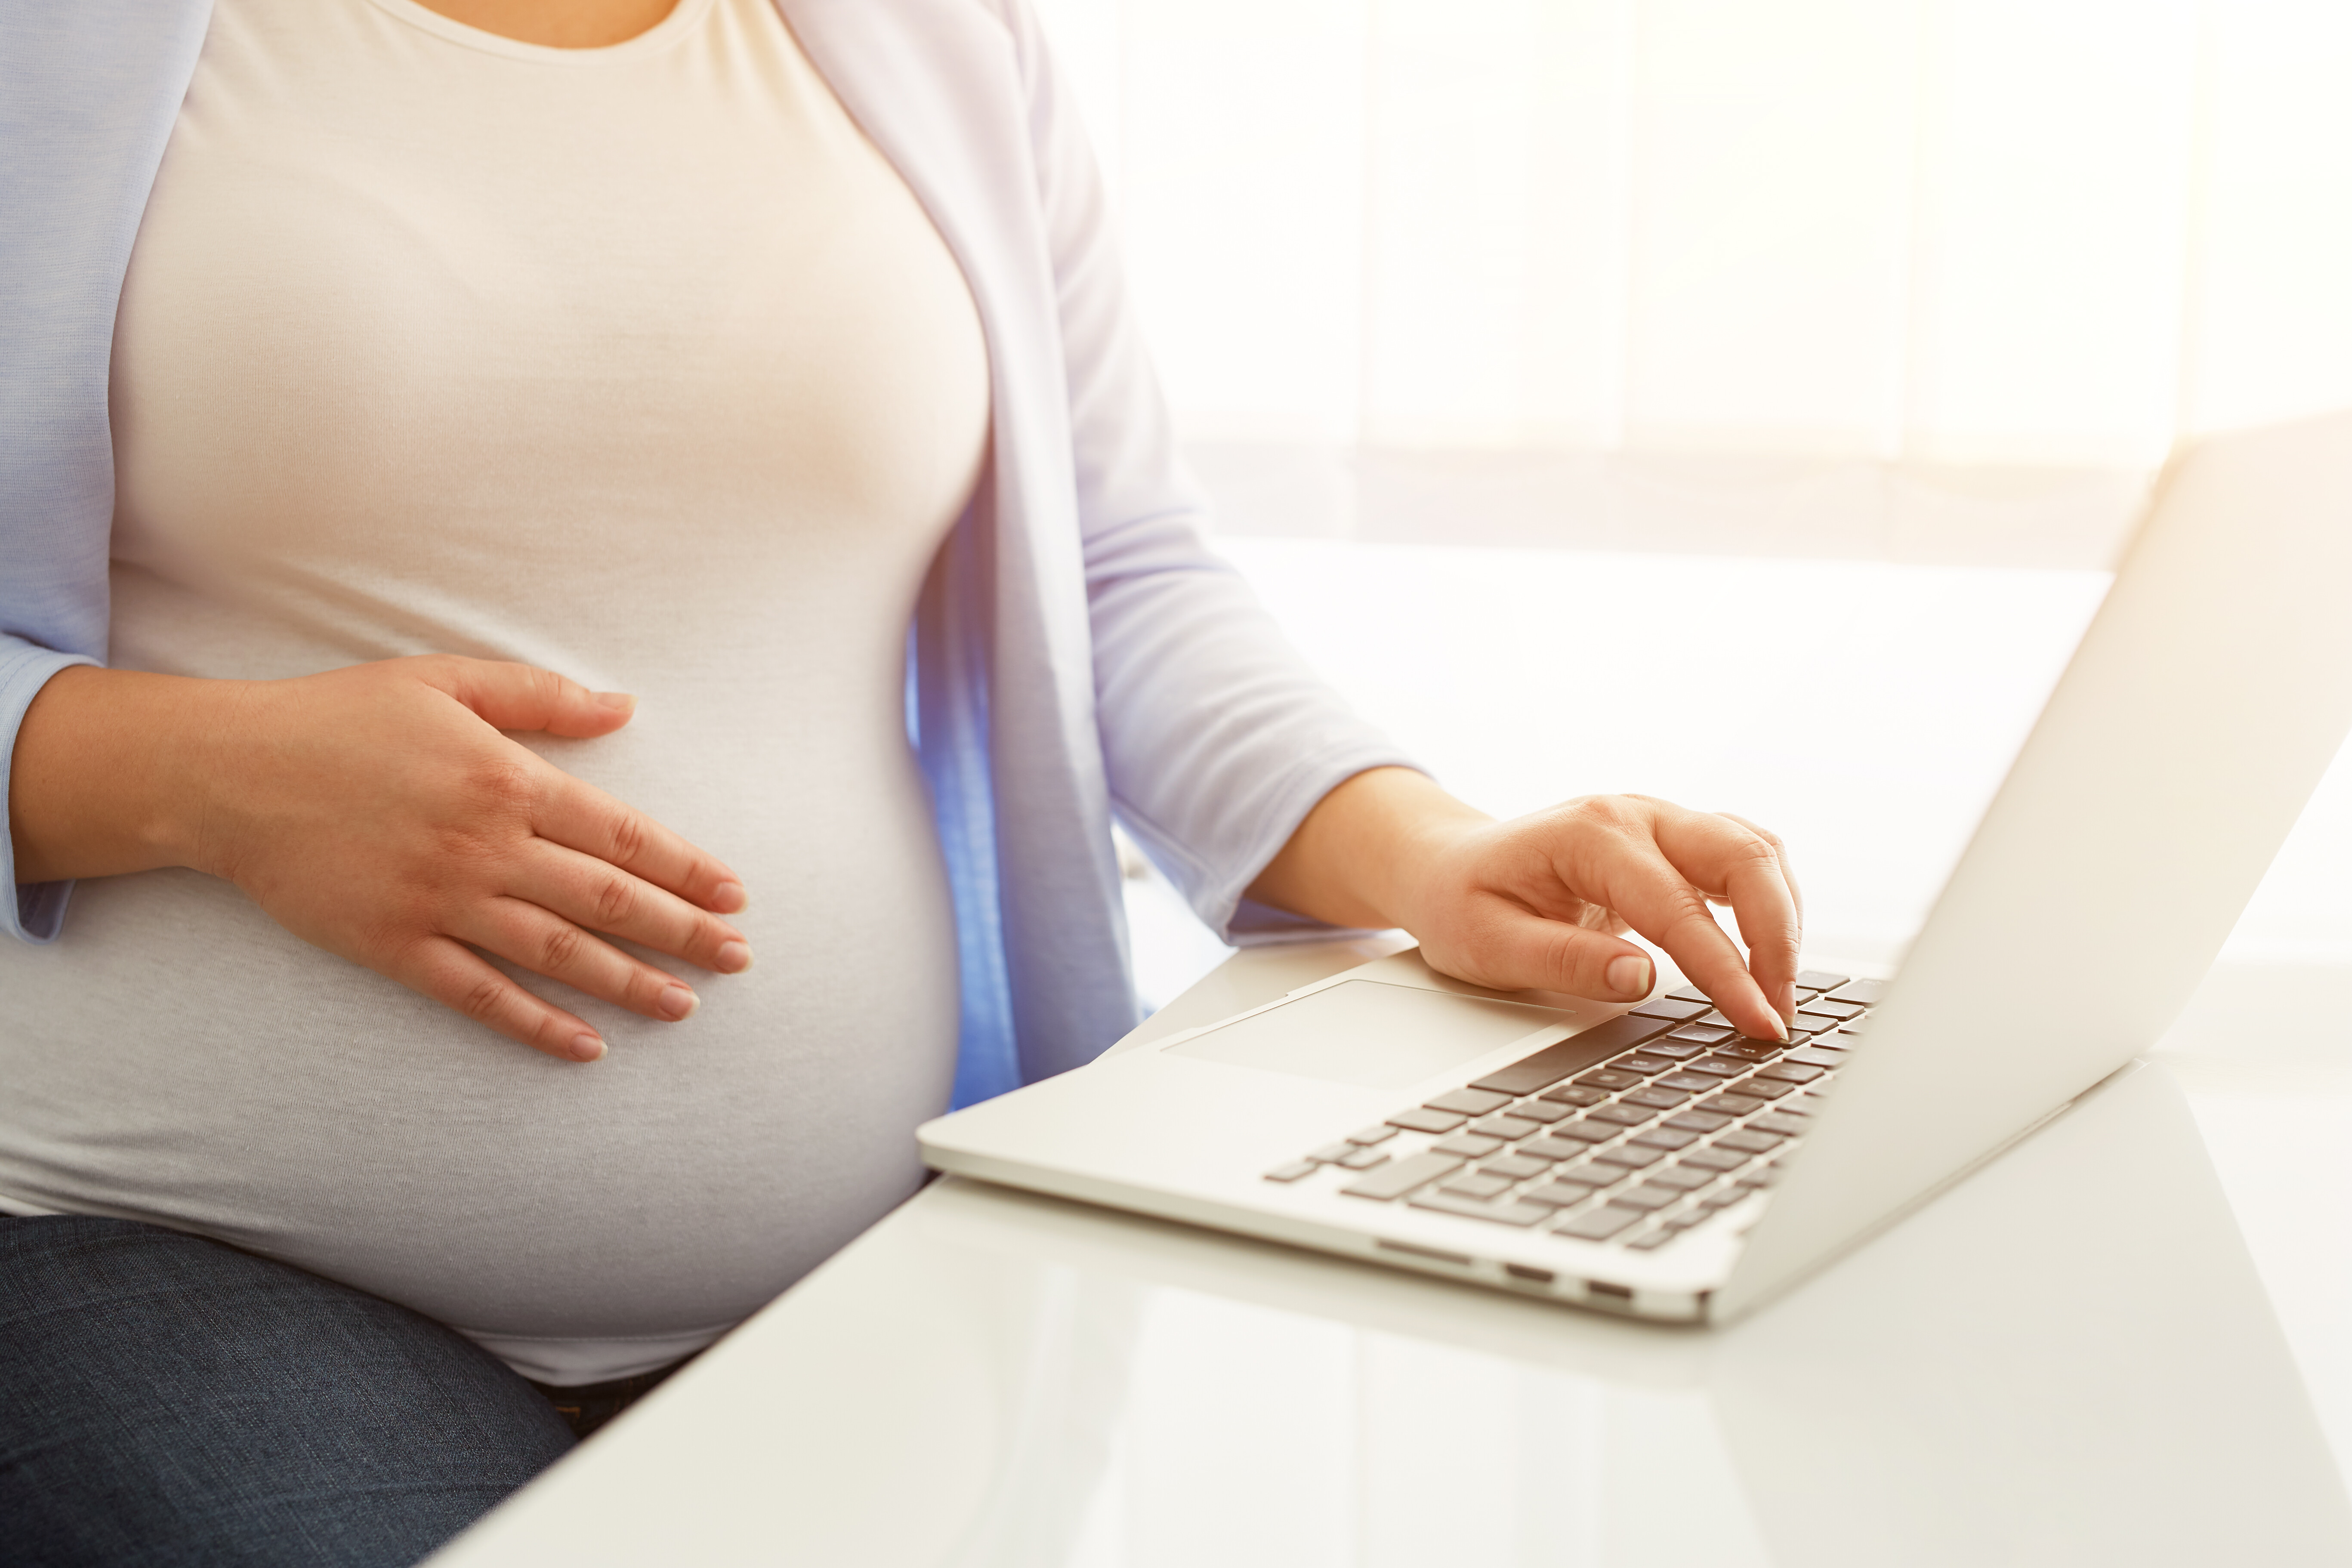 pregnant woman googling how do you find a surrogate mother on laptop